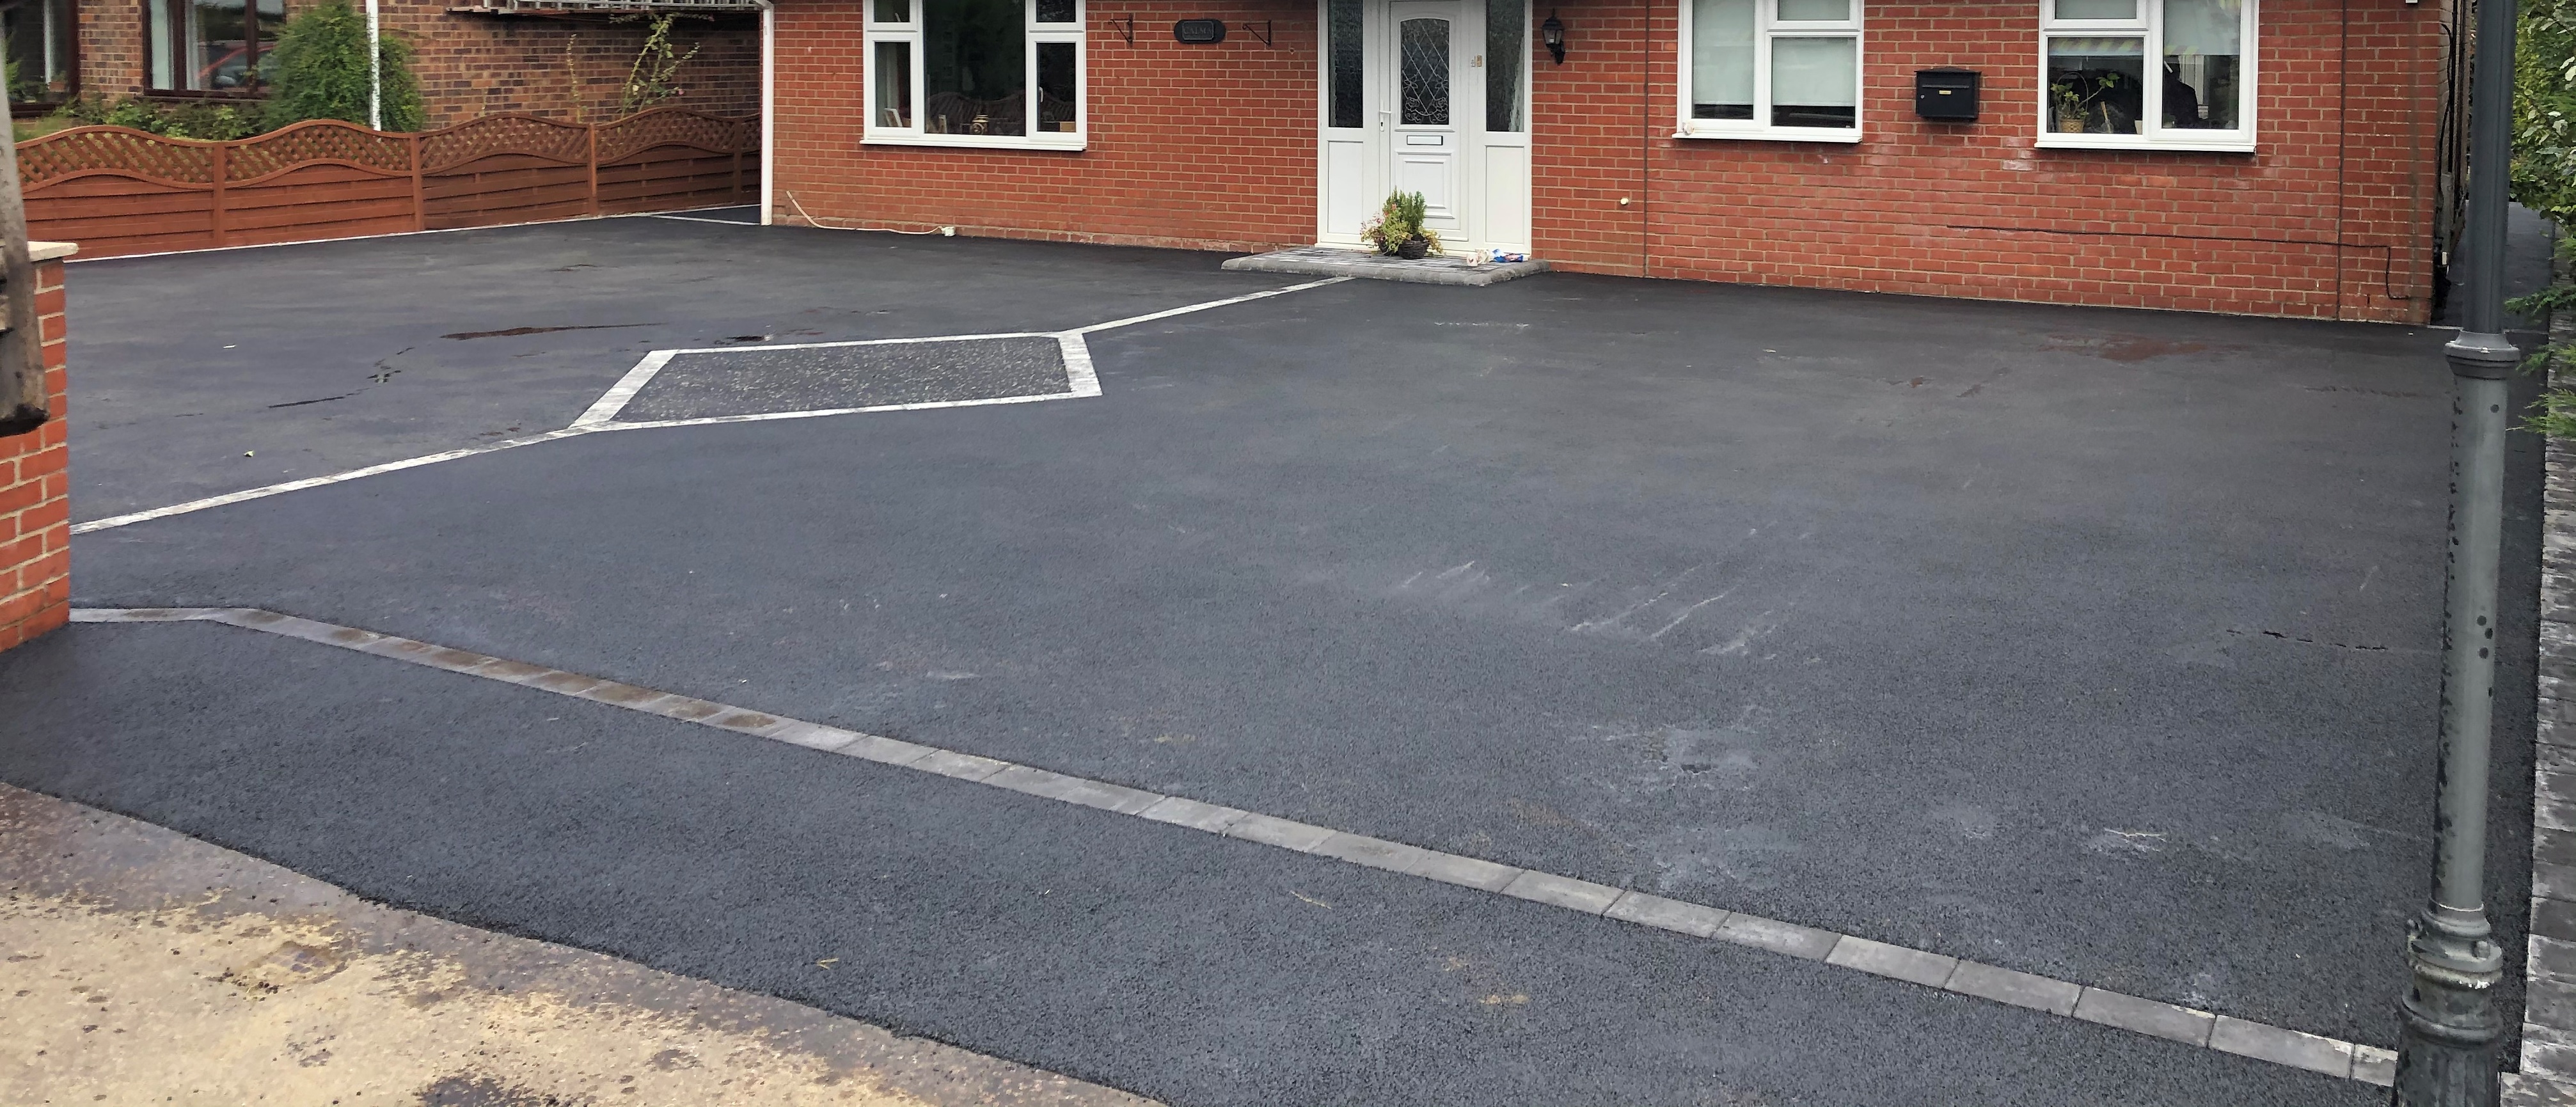 Tarmac is the one of the most economical driveway
surfacing solutions..